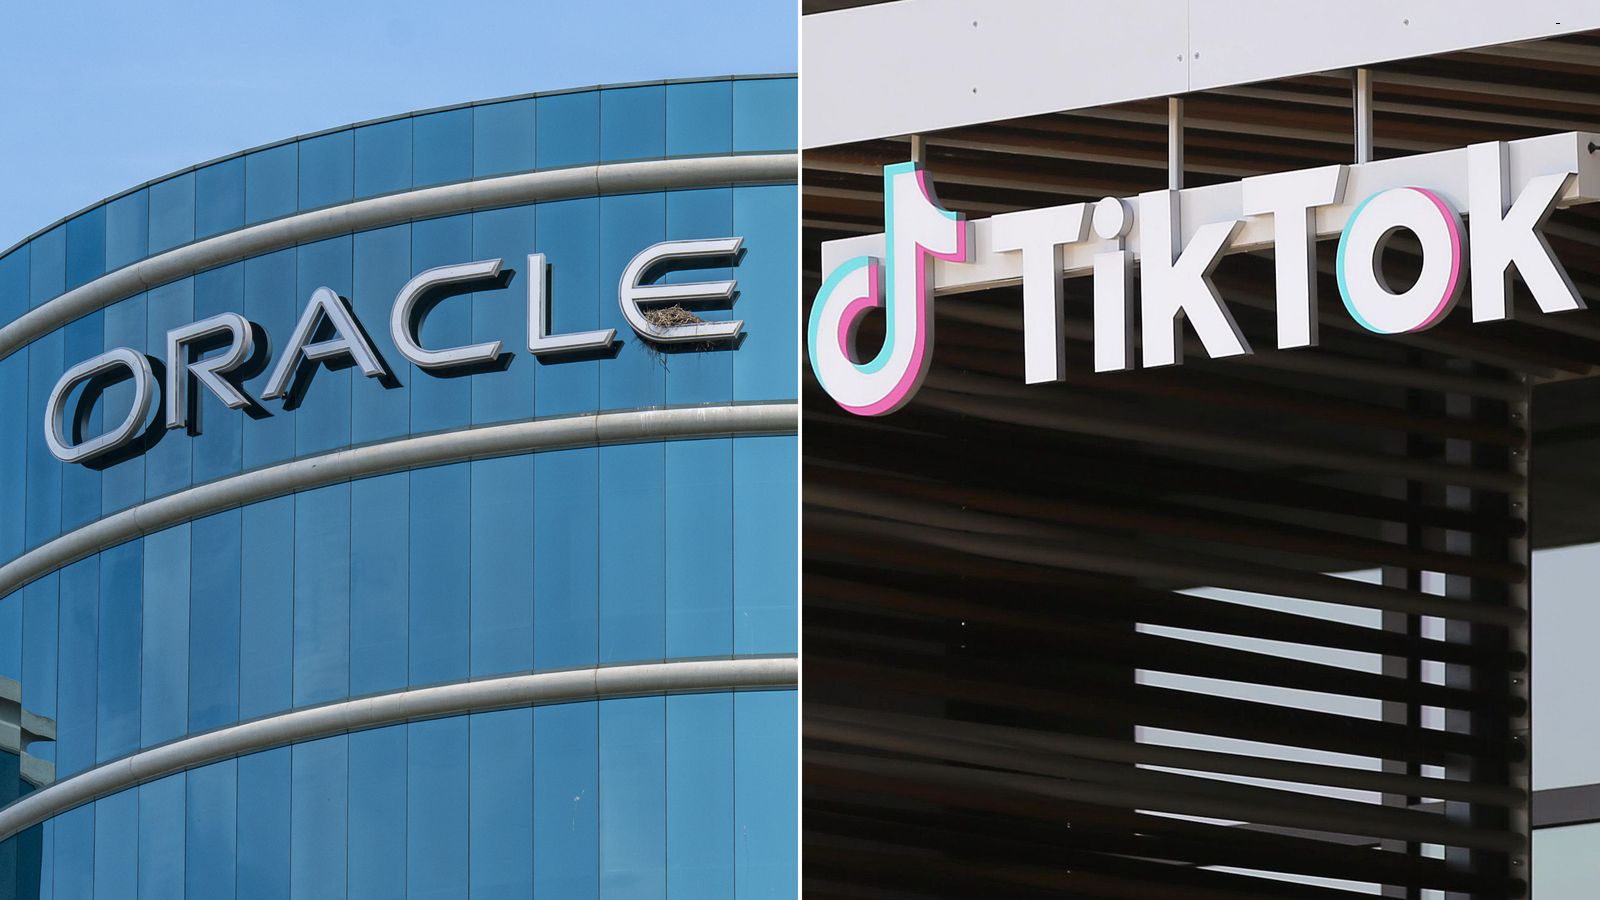 Oracle TikTok Deal Wins Trump's Blessing: Deal at a Glance - Bloomberg